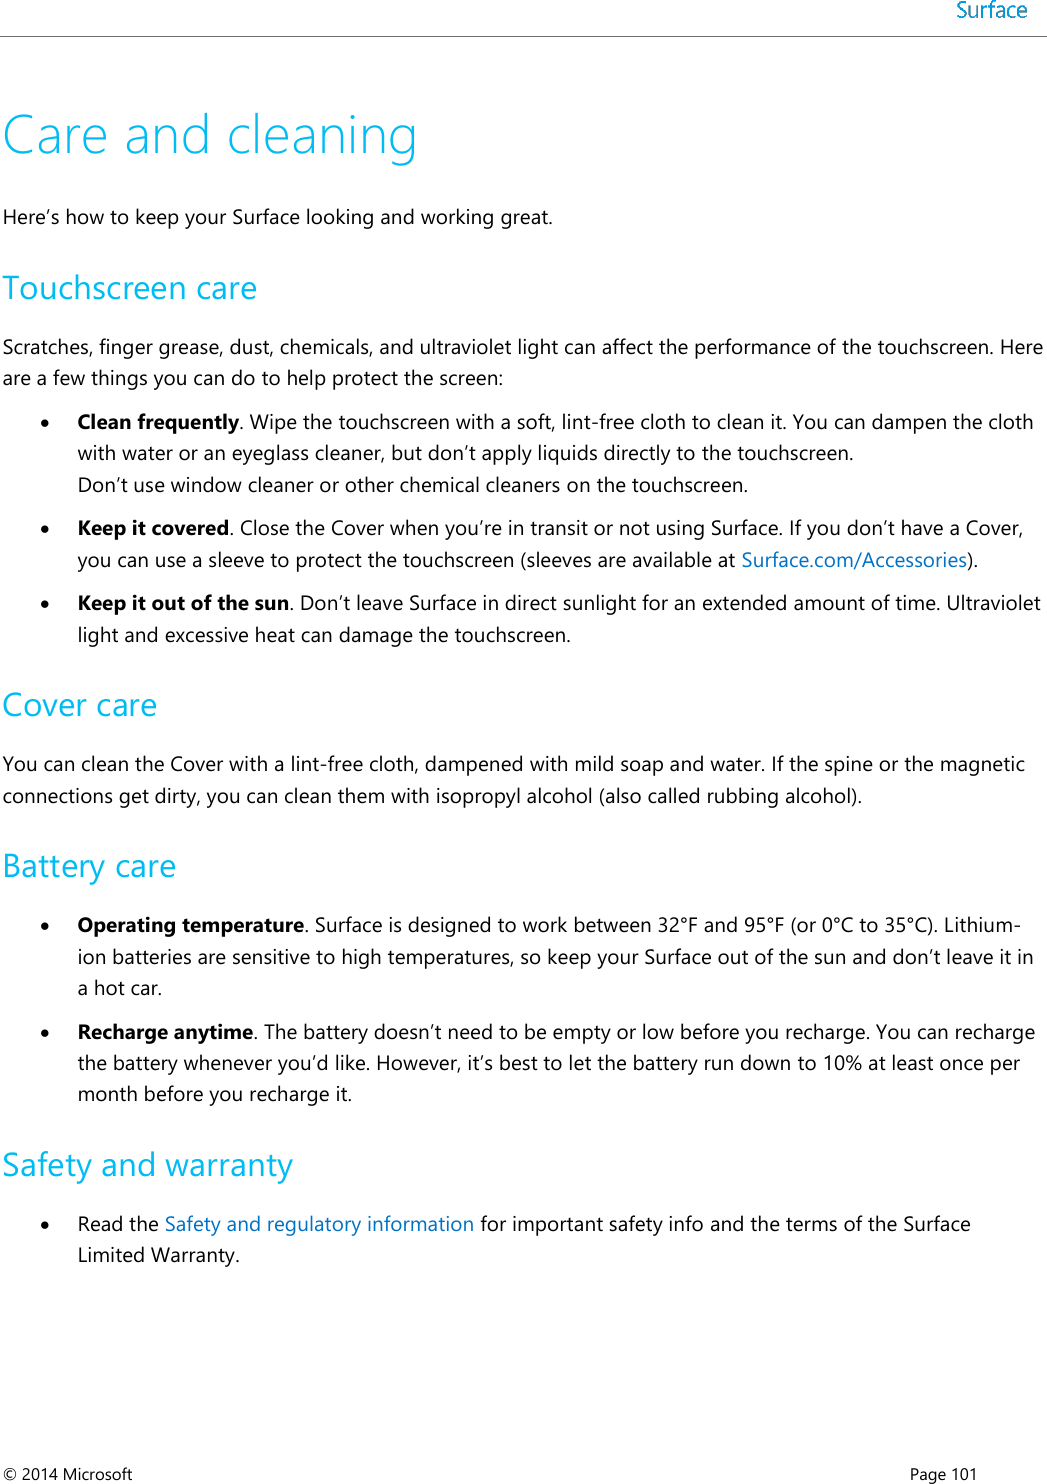  © 2014 Microsoft      Page 101  Care and cleaning Here’s how to keep your Surface looking and working great. Touchscreen care Scratches, finger grease, dust, chemicals, and ultraviolet light can affect the performance of the touchscreen. Here are a few things you can do to help protect the screen:  Clean frequently. Wipe the touchscreen with a soft, lint-free cloth to clean it. You can dampen the cloth with water or an eyeglass cleaner, but don’t apply liquids directly to the touchscreen.  Don’t use window cleaner or other chemical cleaners on the touchscreen.   Keep it covered. Close the Cover when you’re in transit or not using Surface. If you don’t have a Cover, you can use a sleeve to protect the touchscreen (sleeves are available at Surface.com/Accessories).  Keep it out of the sun. Don’t leave Surface in direct sunlight for an extended amount of time. Ultraviolet light and excessive heat can damage the touchscreen.  Cover care You can clean the Cover with a lint-free cloth, dampened with mild soap and water. If the spine or the magnetic connections get dirty, you can clean them with isopropyl alcohol (also called rubbing alcohol).  Battery care  Operating temperature. Surface is designed to work between 32°F and 95°F (or 0°C to 35°C). Lithium-ion batteries are sensitive to high temperatures, so keep your Surface out of the sun and don’t leave it in a hot car.   Recharge anytime. The battery doesn’t need to be empty or low before you recharge. You can recharge the battery whenever you’d like. However, it’s best to let the battery run down to 10% at least once per month before you recharge it. Safety and warranty  Read the Safety and regulatory information for important safety info and the terms of the Surface Limited Warranty. 